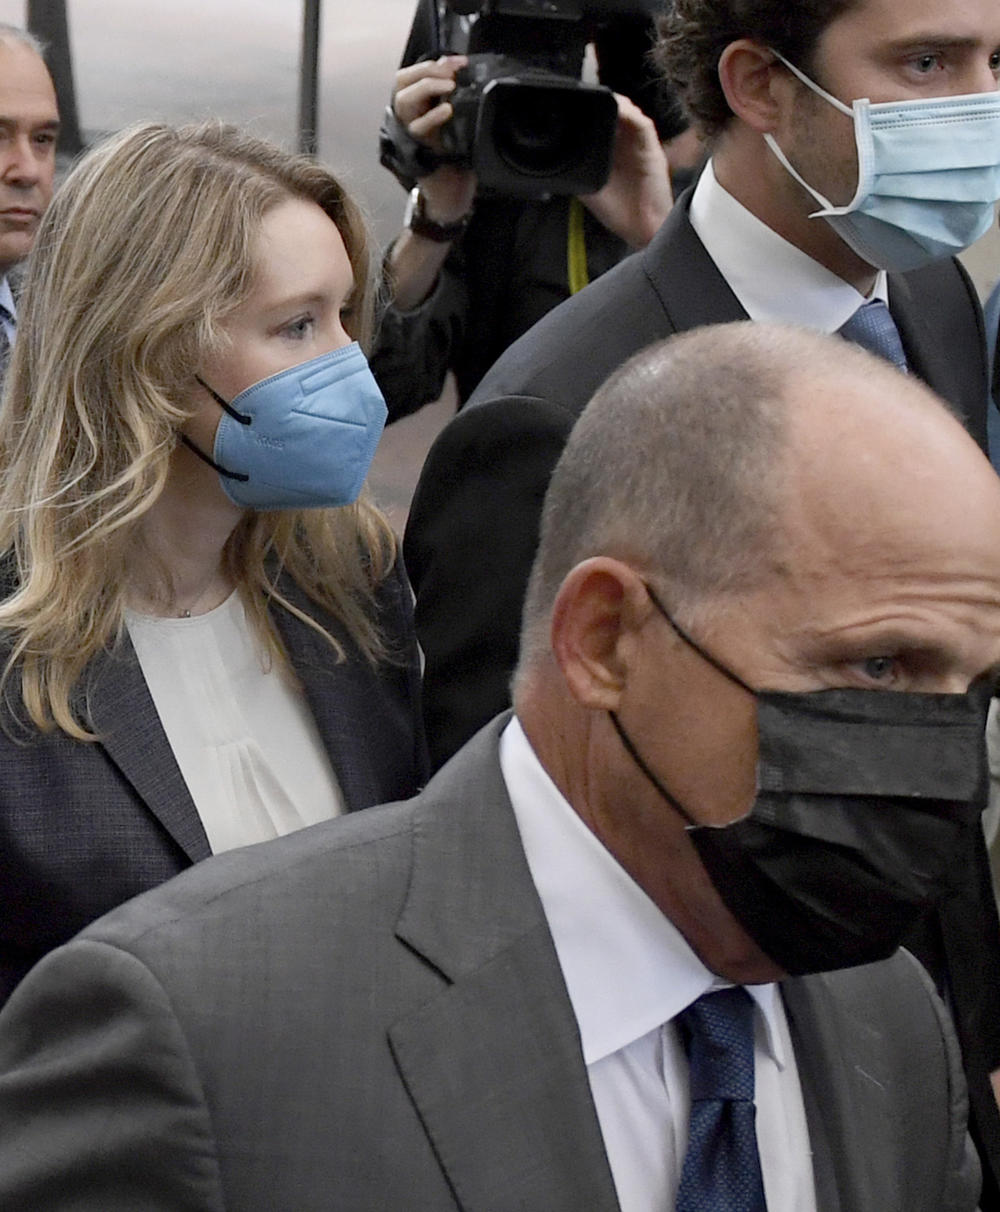 Even before his unmasking, Bill Evans (right), with Elizabeth Holmes, had left some clues for reporters that he was not a car enthusiast just crossing off his bucket list item of attending a trial.